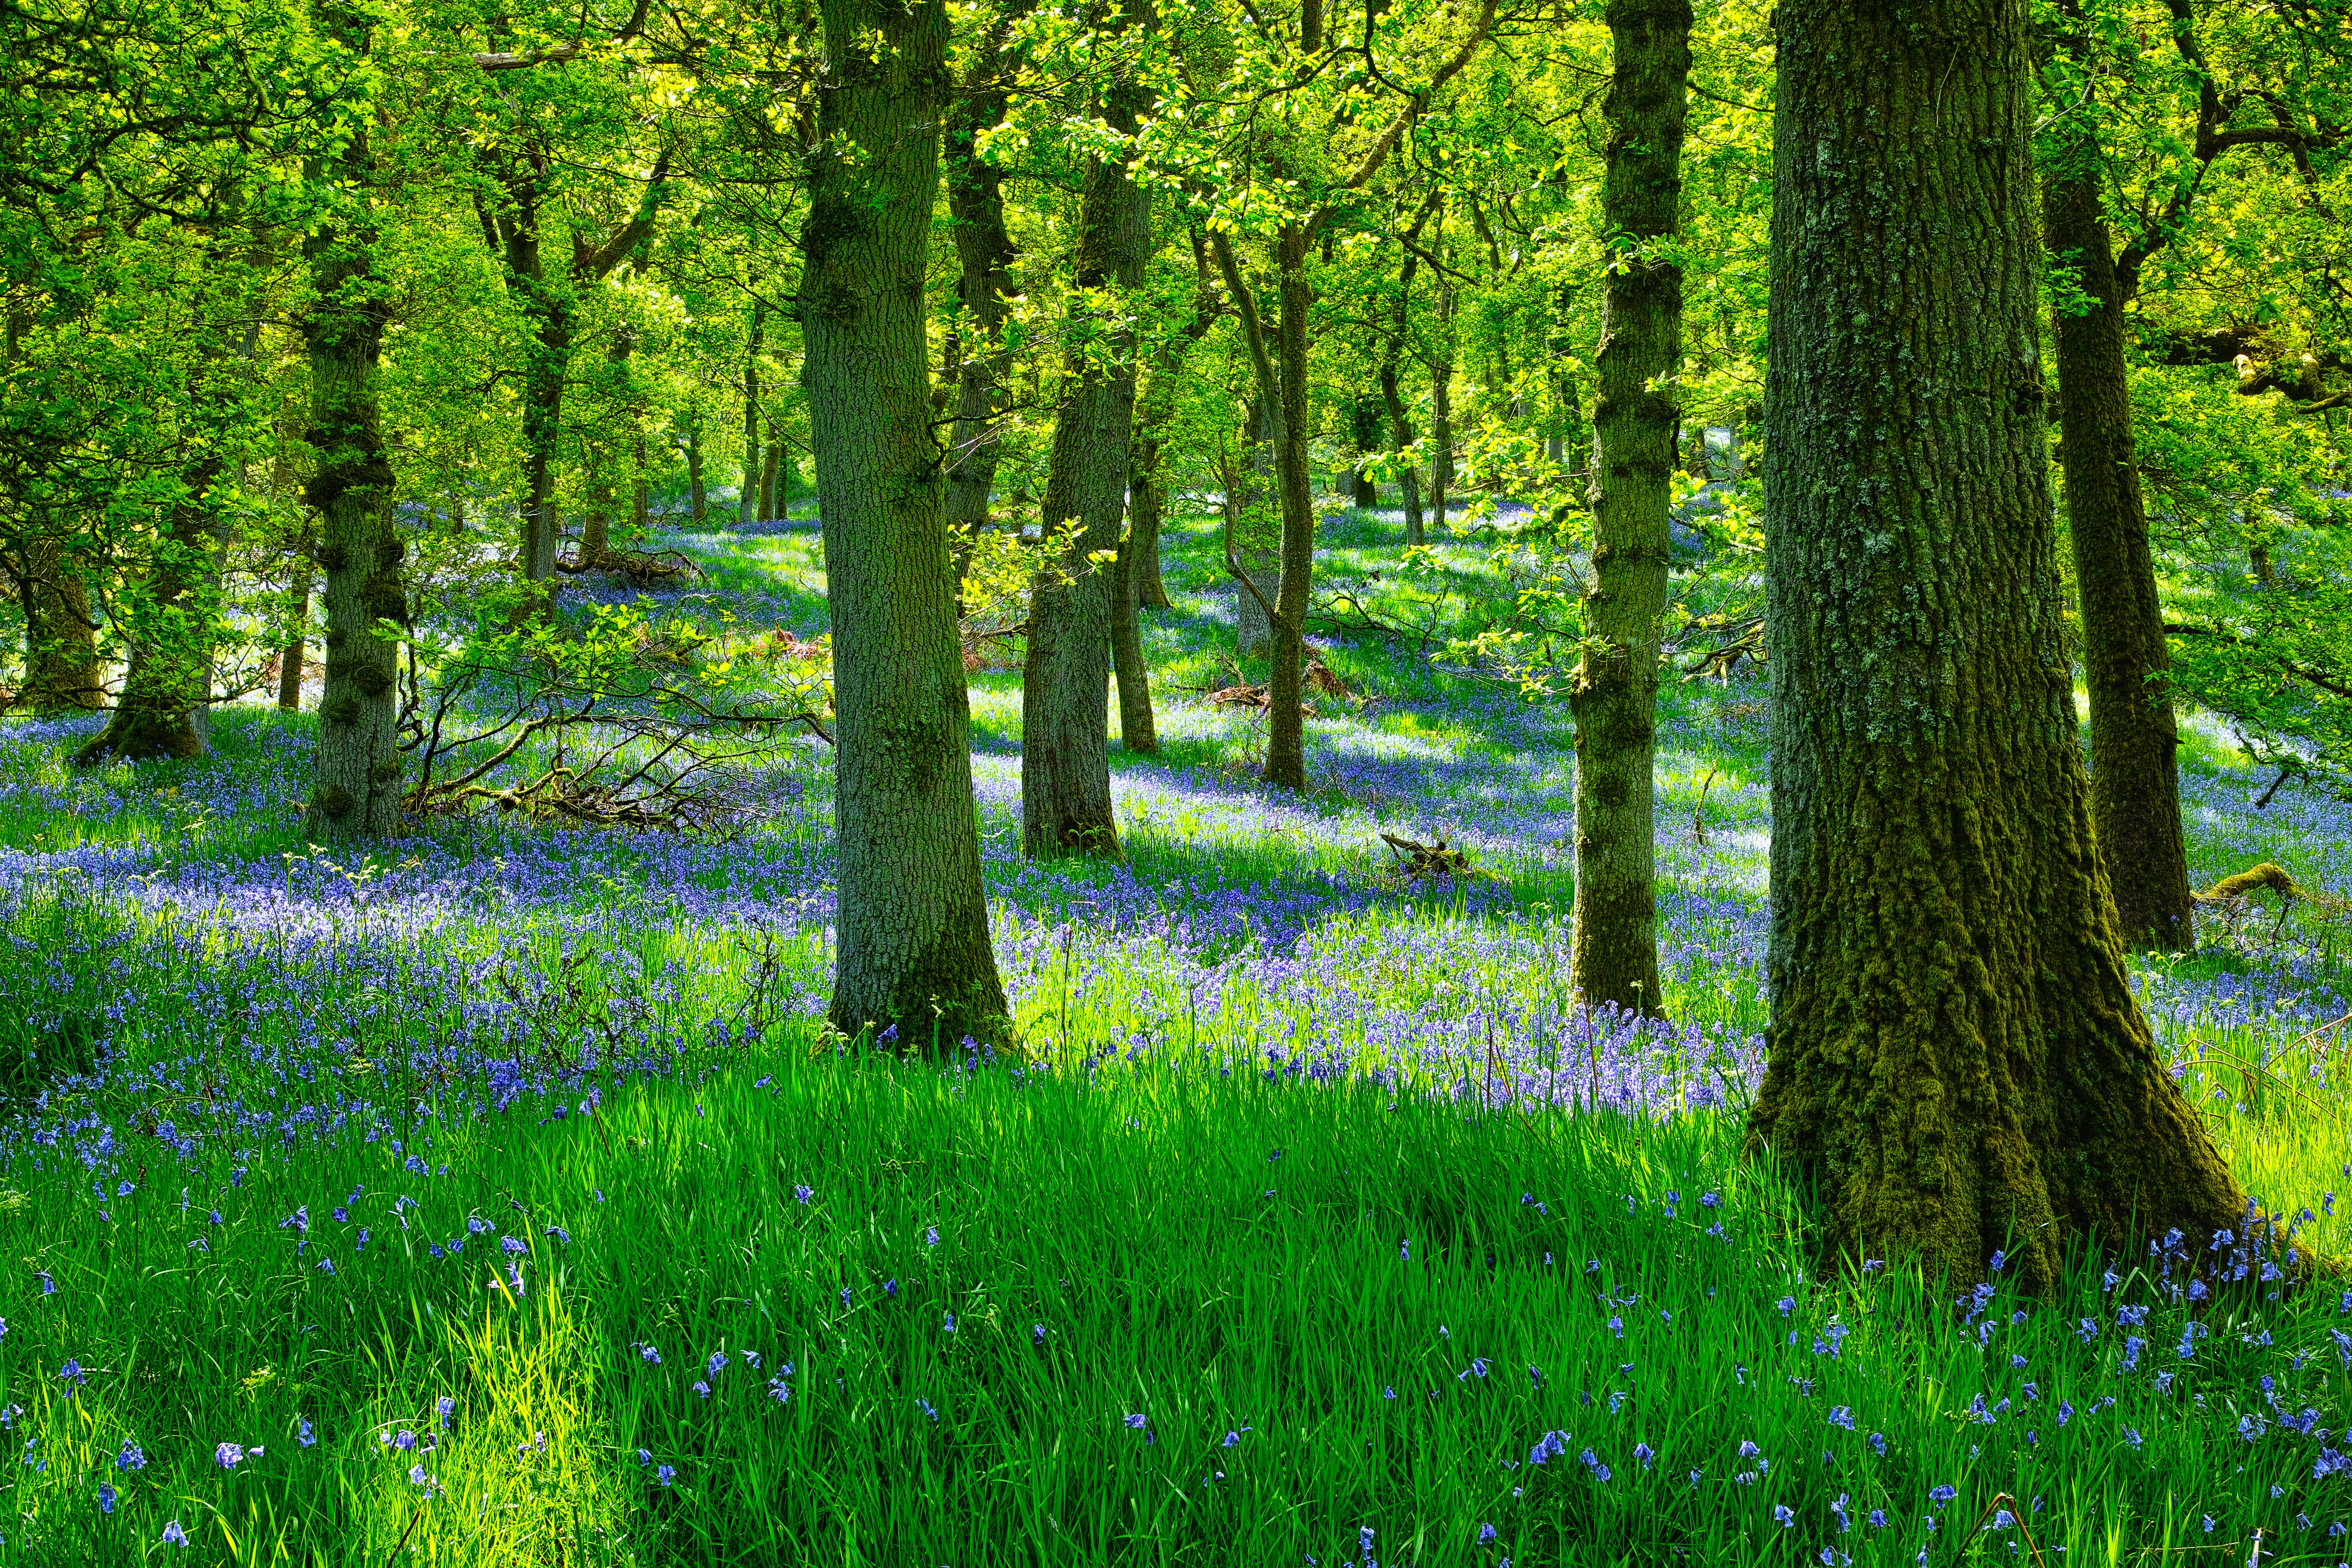 A photograph of a bluebell wood in full bloom.